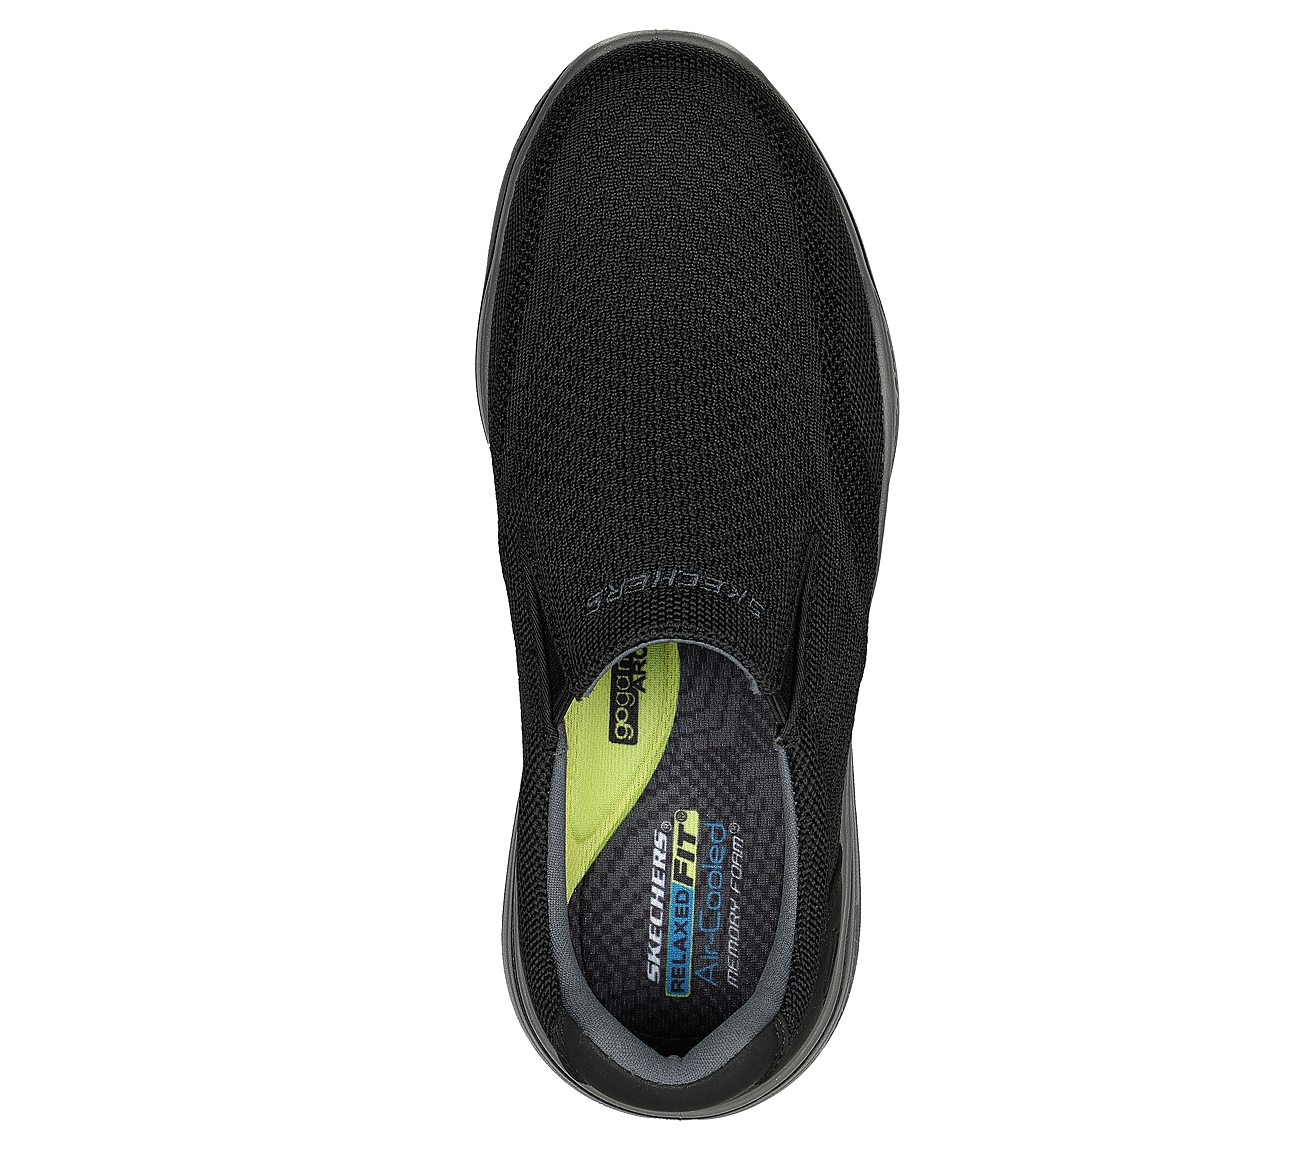 GLIDE-STEP EXPECTED - VIRDEN, BBBBLACK Footwear Top View